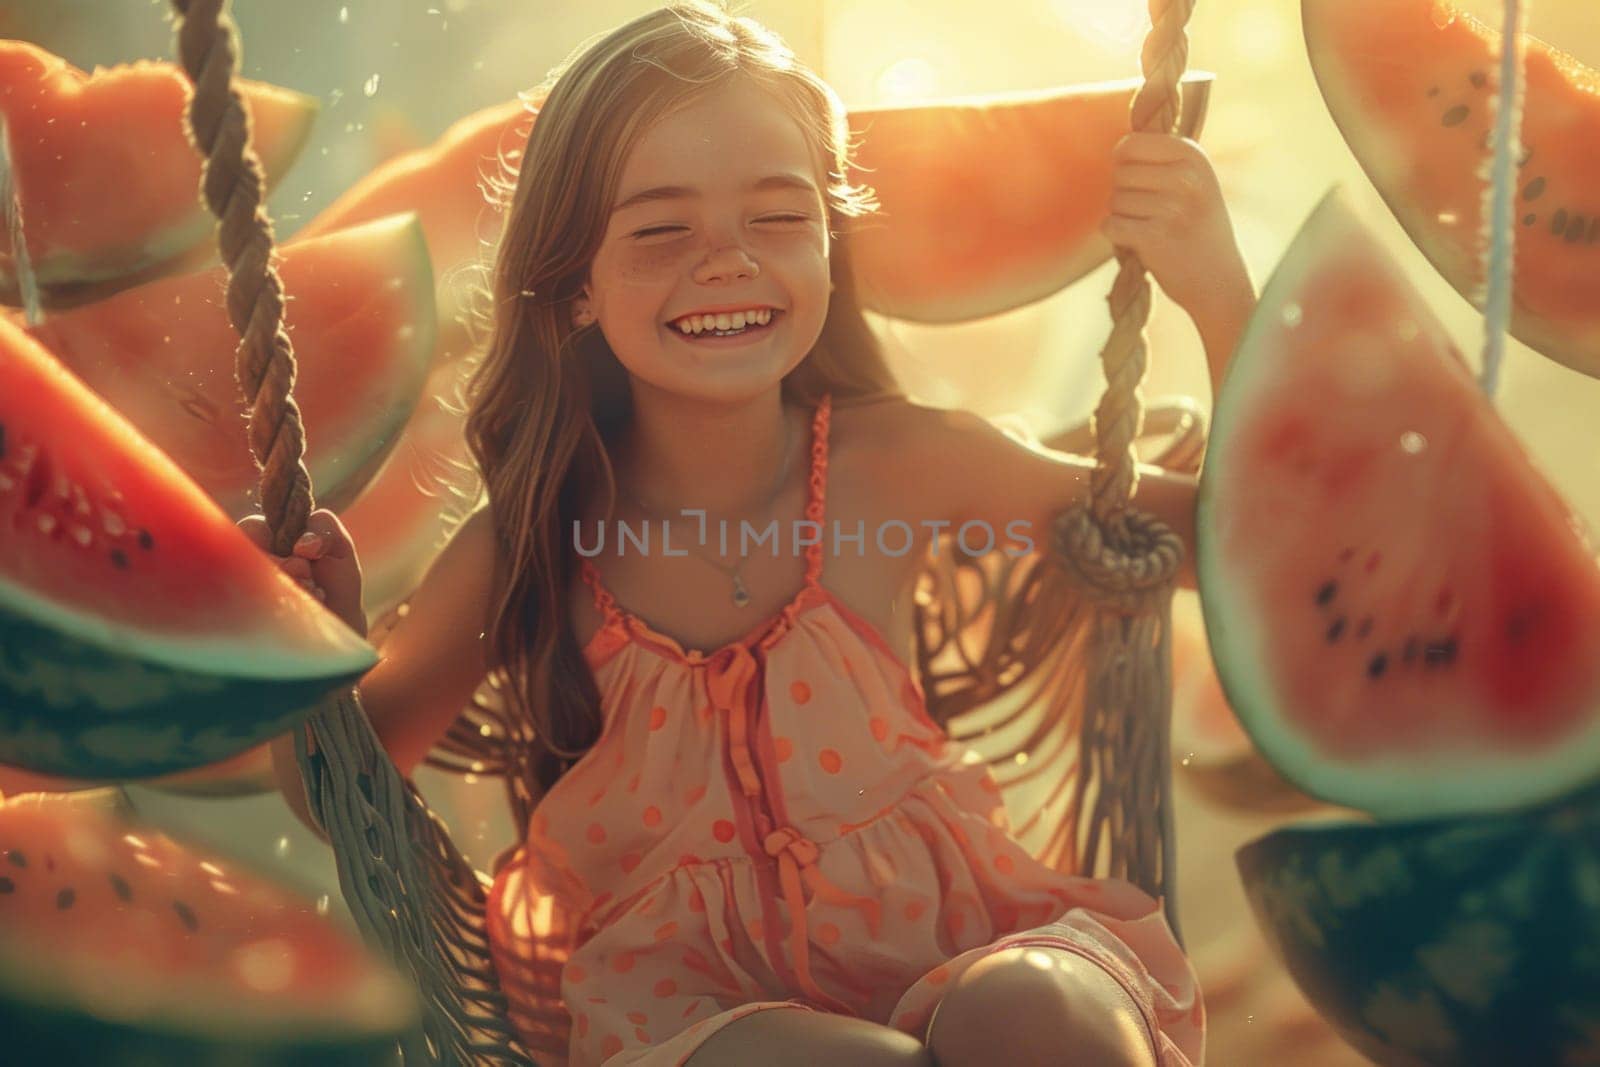 A young girl is swinging on a rope while surrounded by watermelon slices. She is smiling and she is enjoying herself. Concept of fun and playfulness